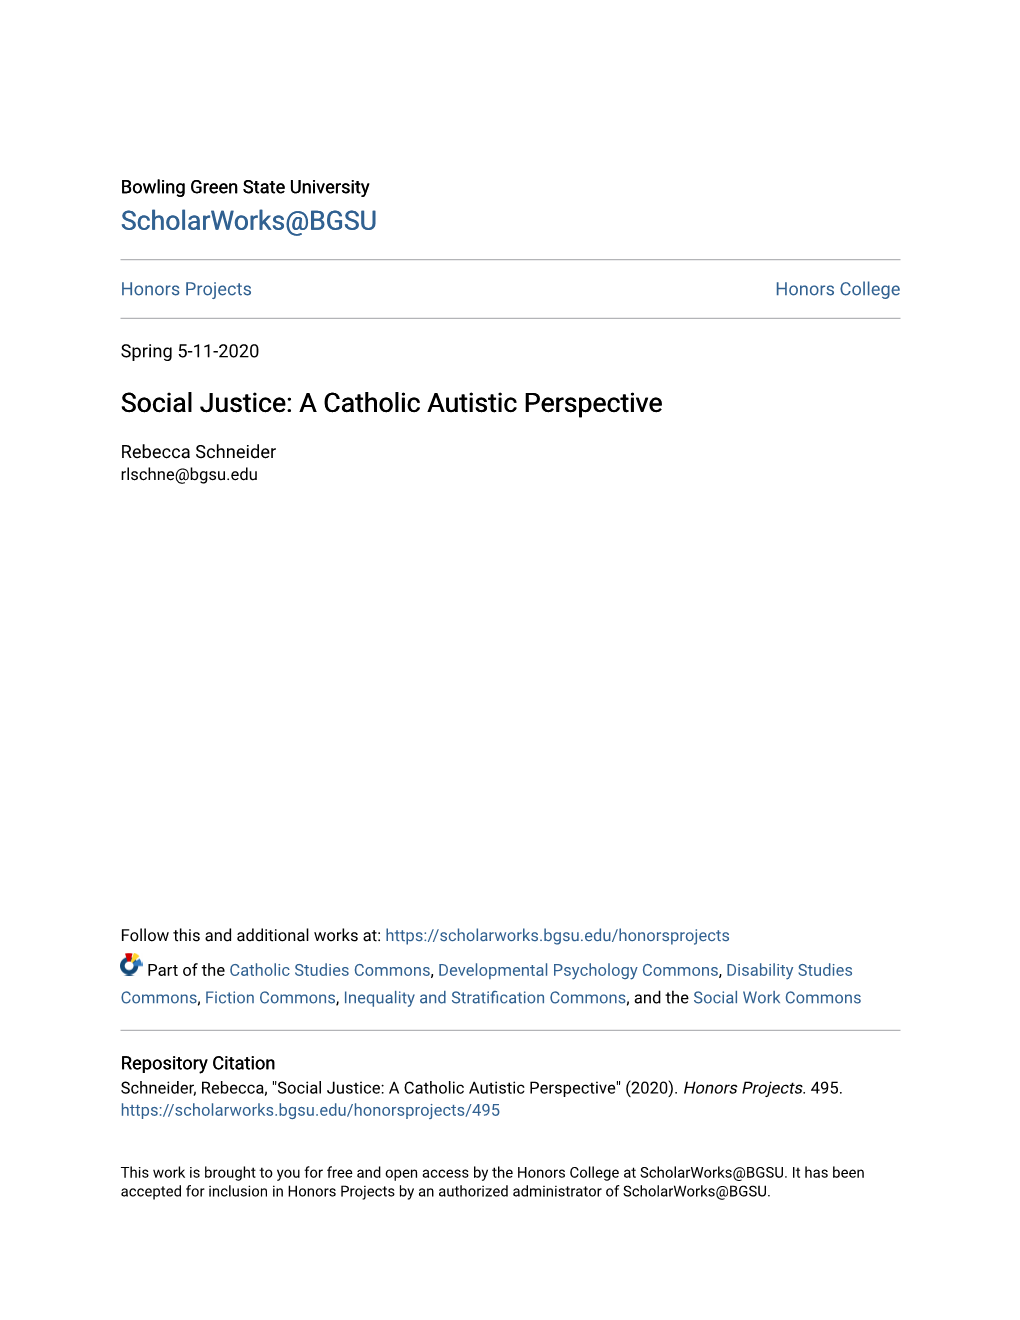 Social Justice: a Catholic Autistic Perspective